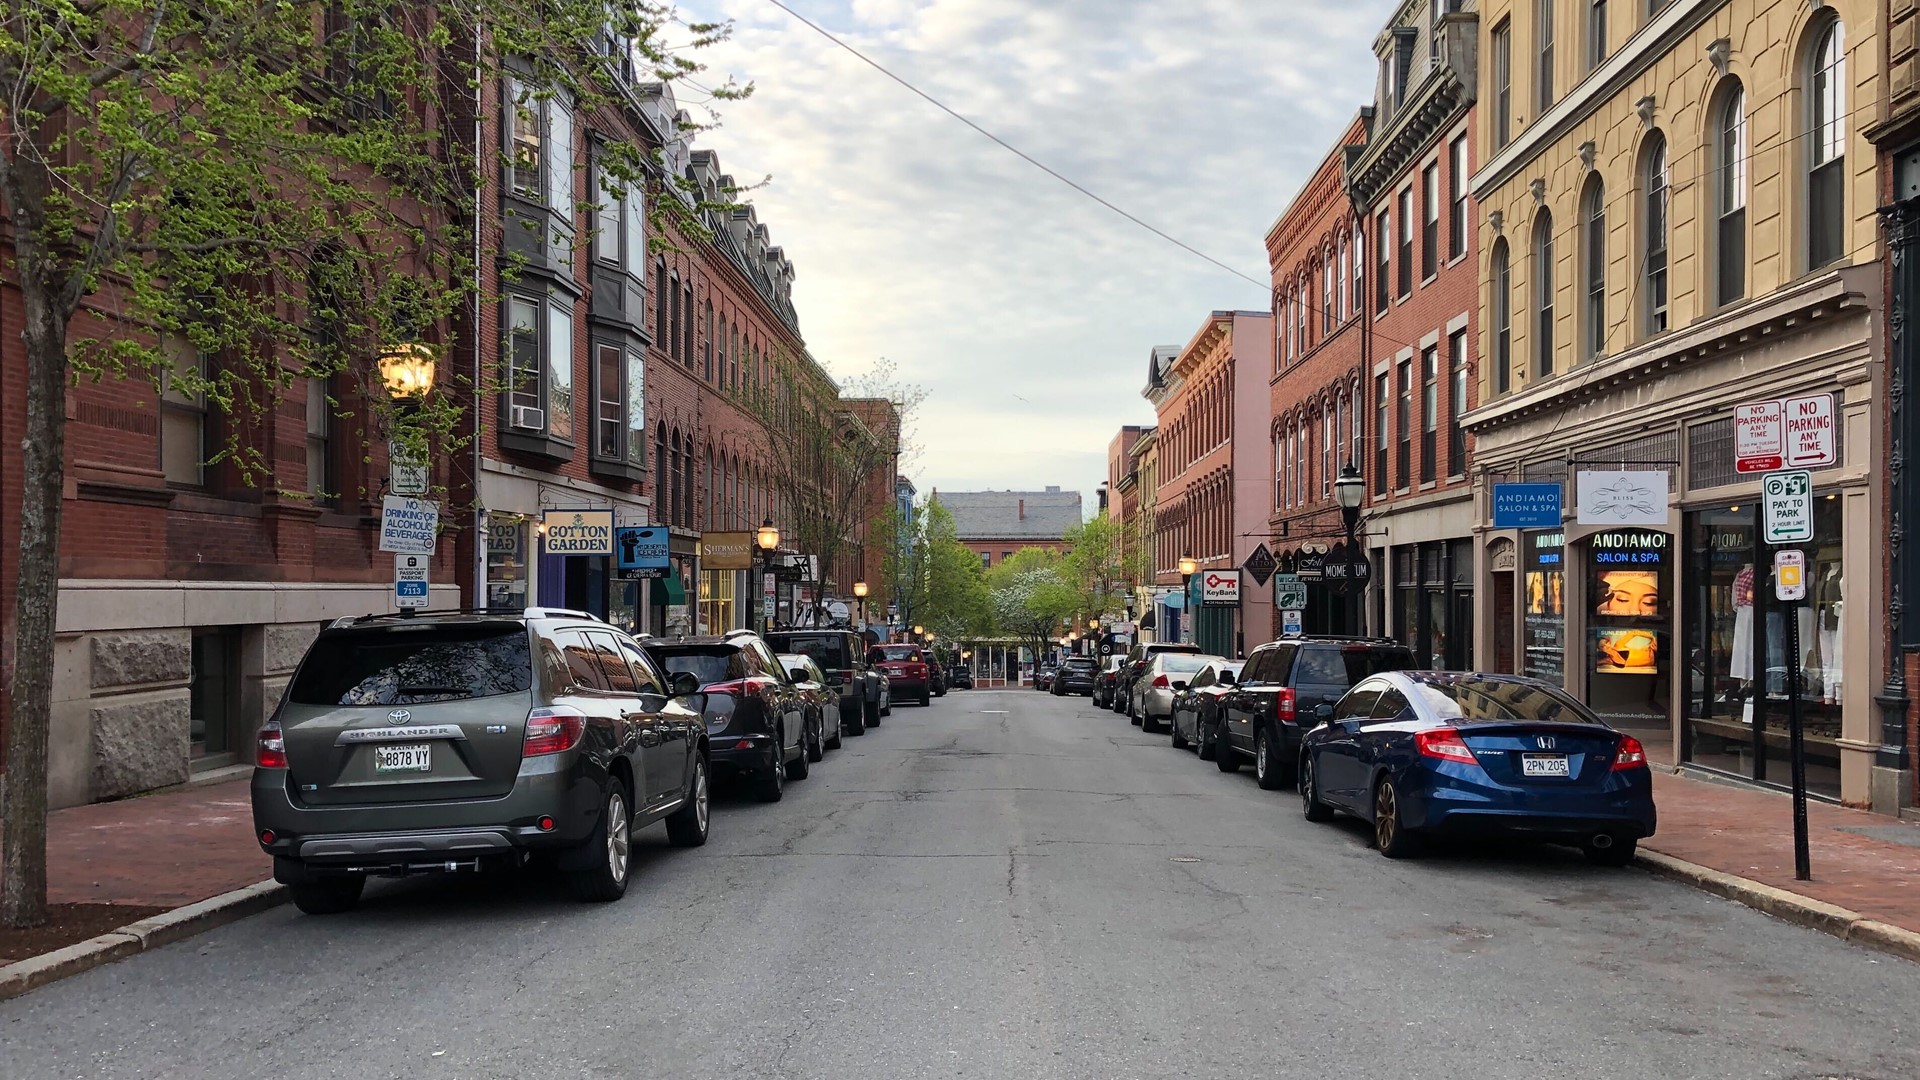 The plan would close five streets downtown in an effort to allow businesses to reopen safely and expand outdoor dining and retail sales.